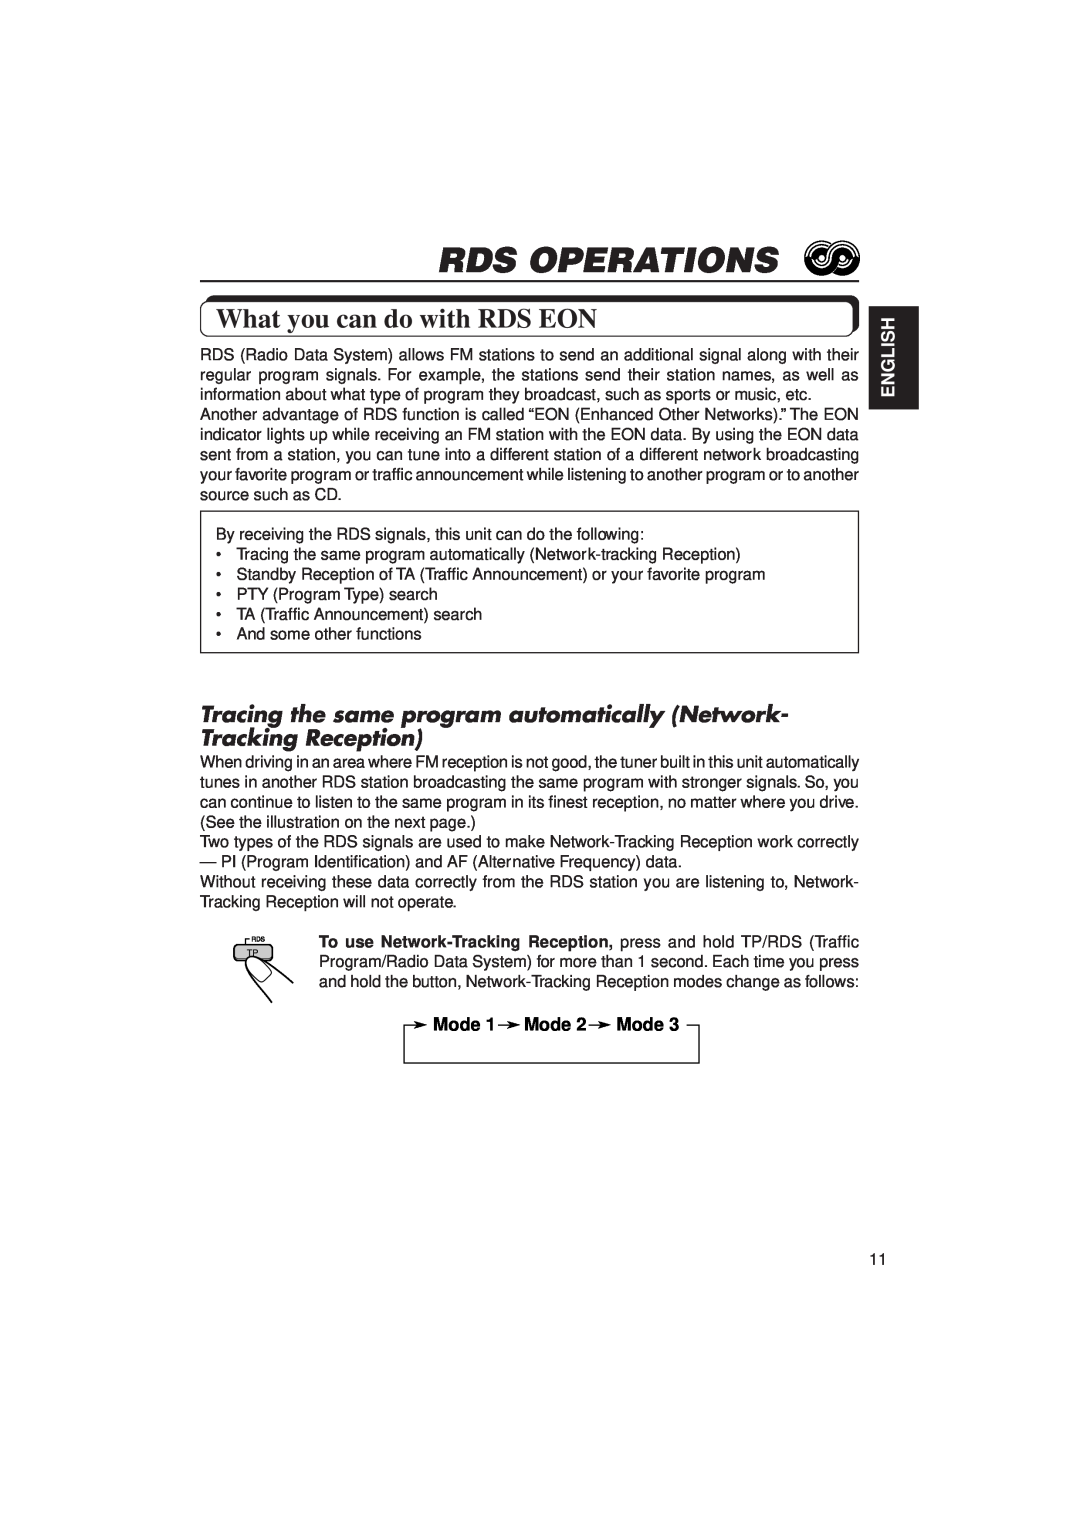 JVC KD-LX3R manual Rds Operations, What you can do with RDS EON, English, Mode 1 Mode 2 Mode 